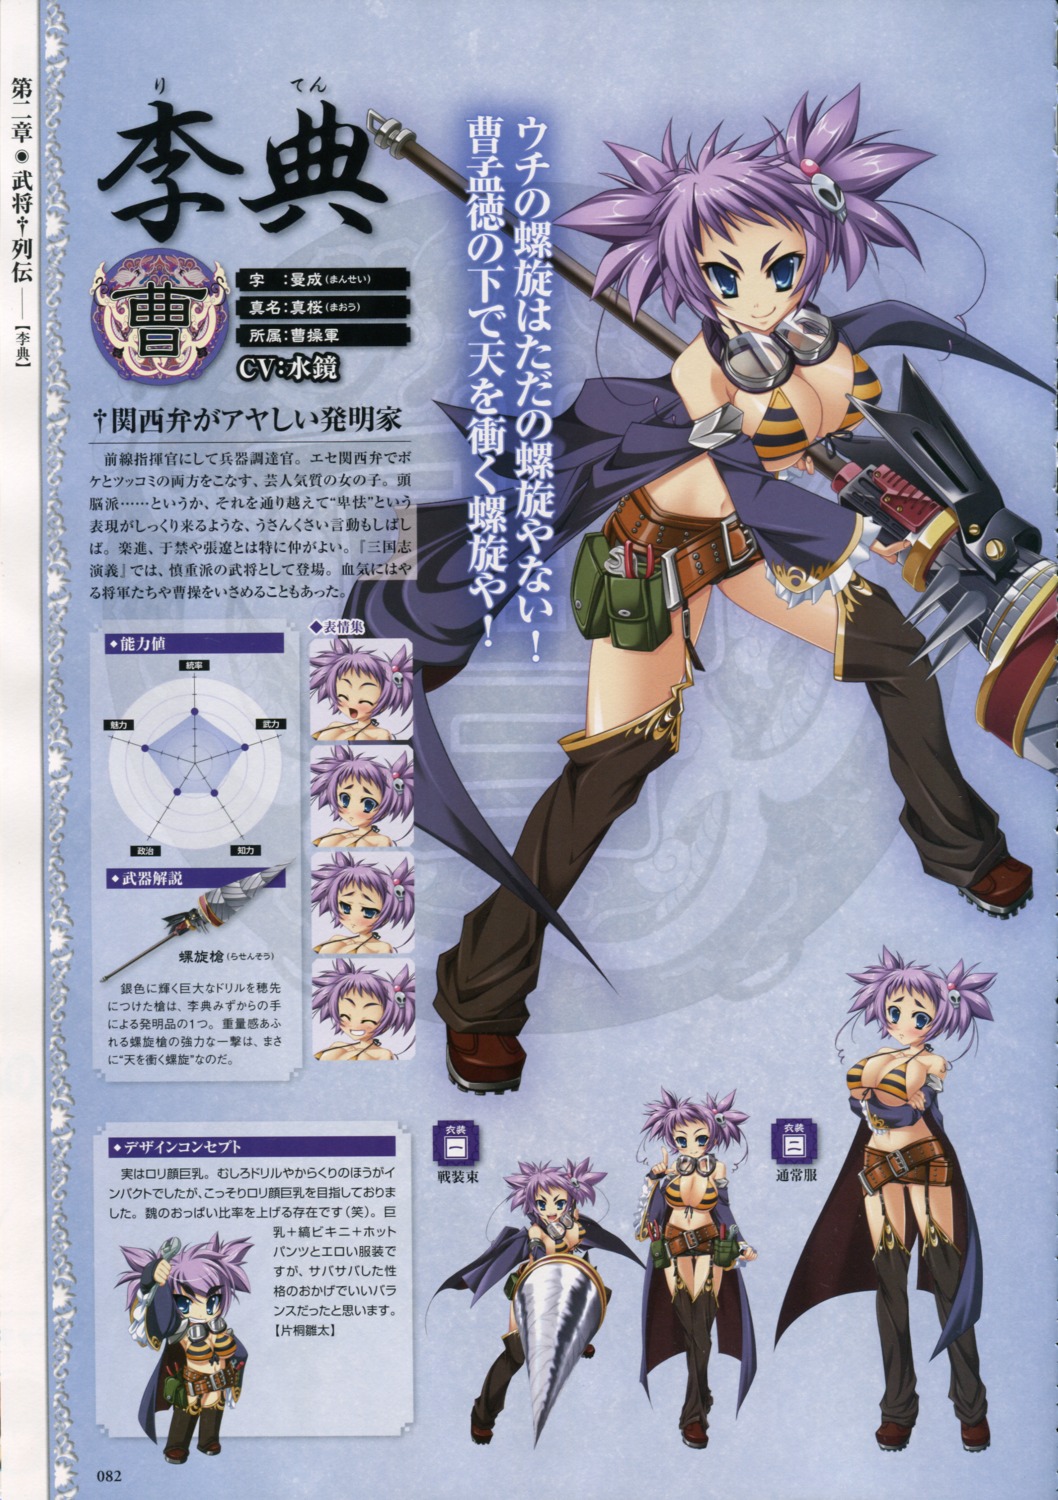 Baseson Koihime Musou Riten Bikini Top Character Design Cleavage Expression Profile Page Swimsuits Yande Re